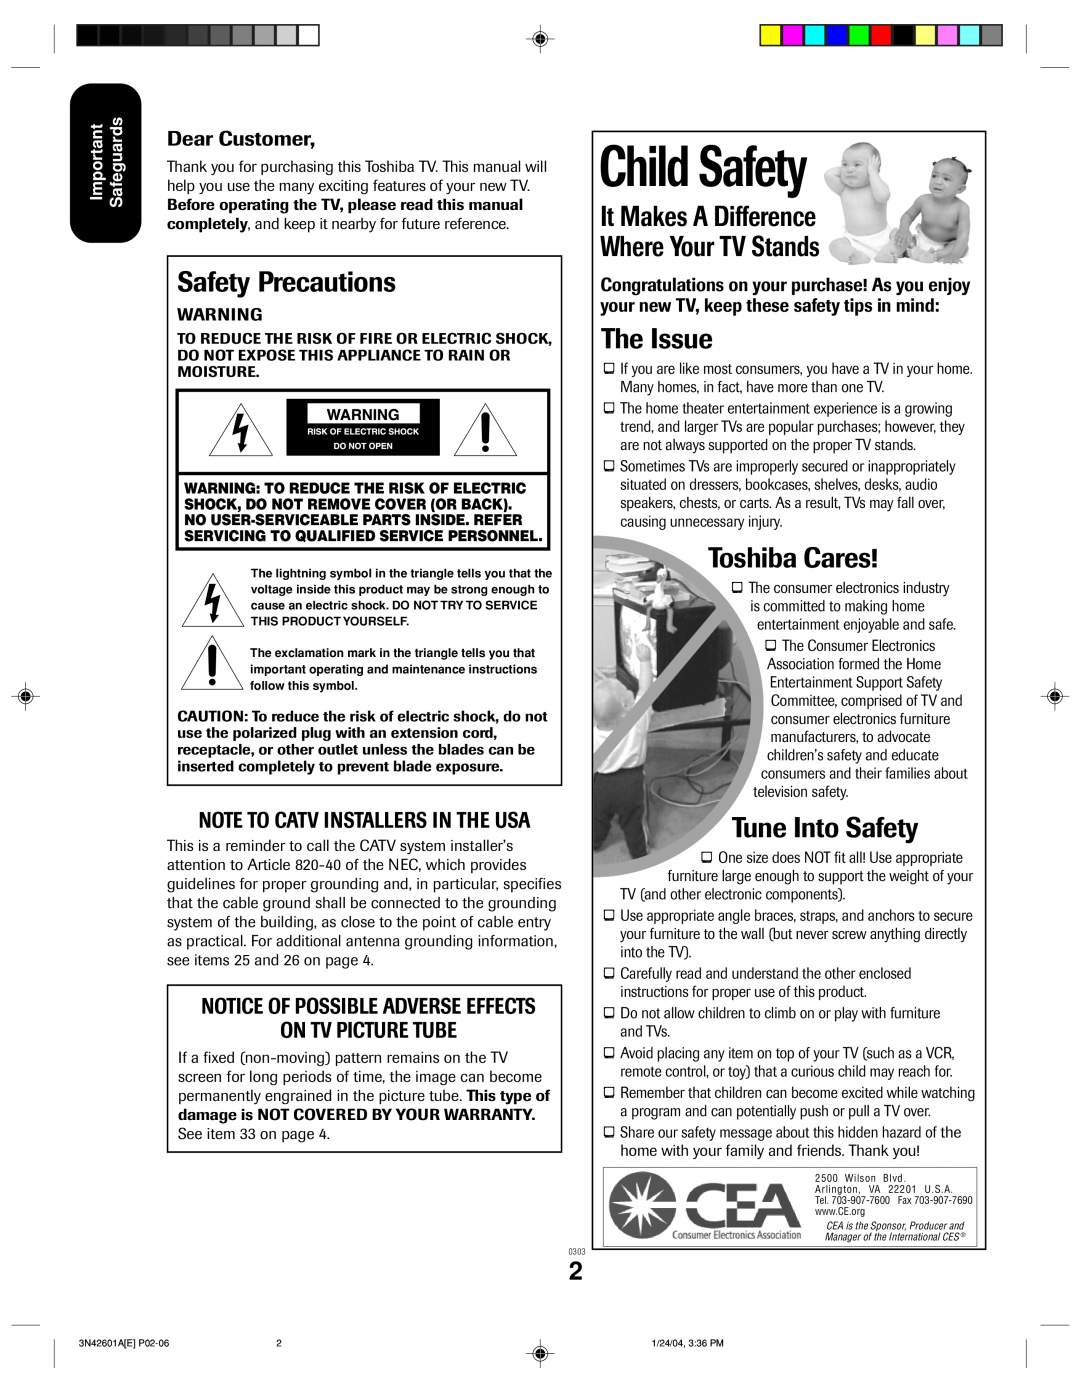 Toshiba 27A44 Child Safety, Safety Precautions, It Makes A Difference Where Your TV Stands, The Issue, Toshiba Cares 